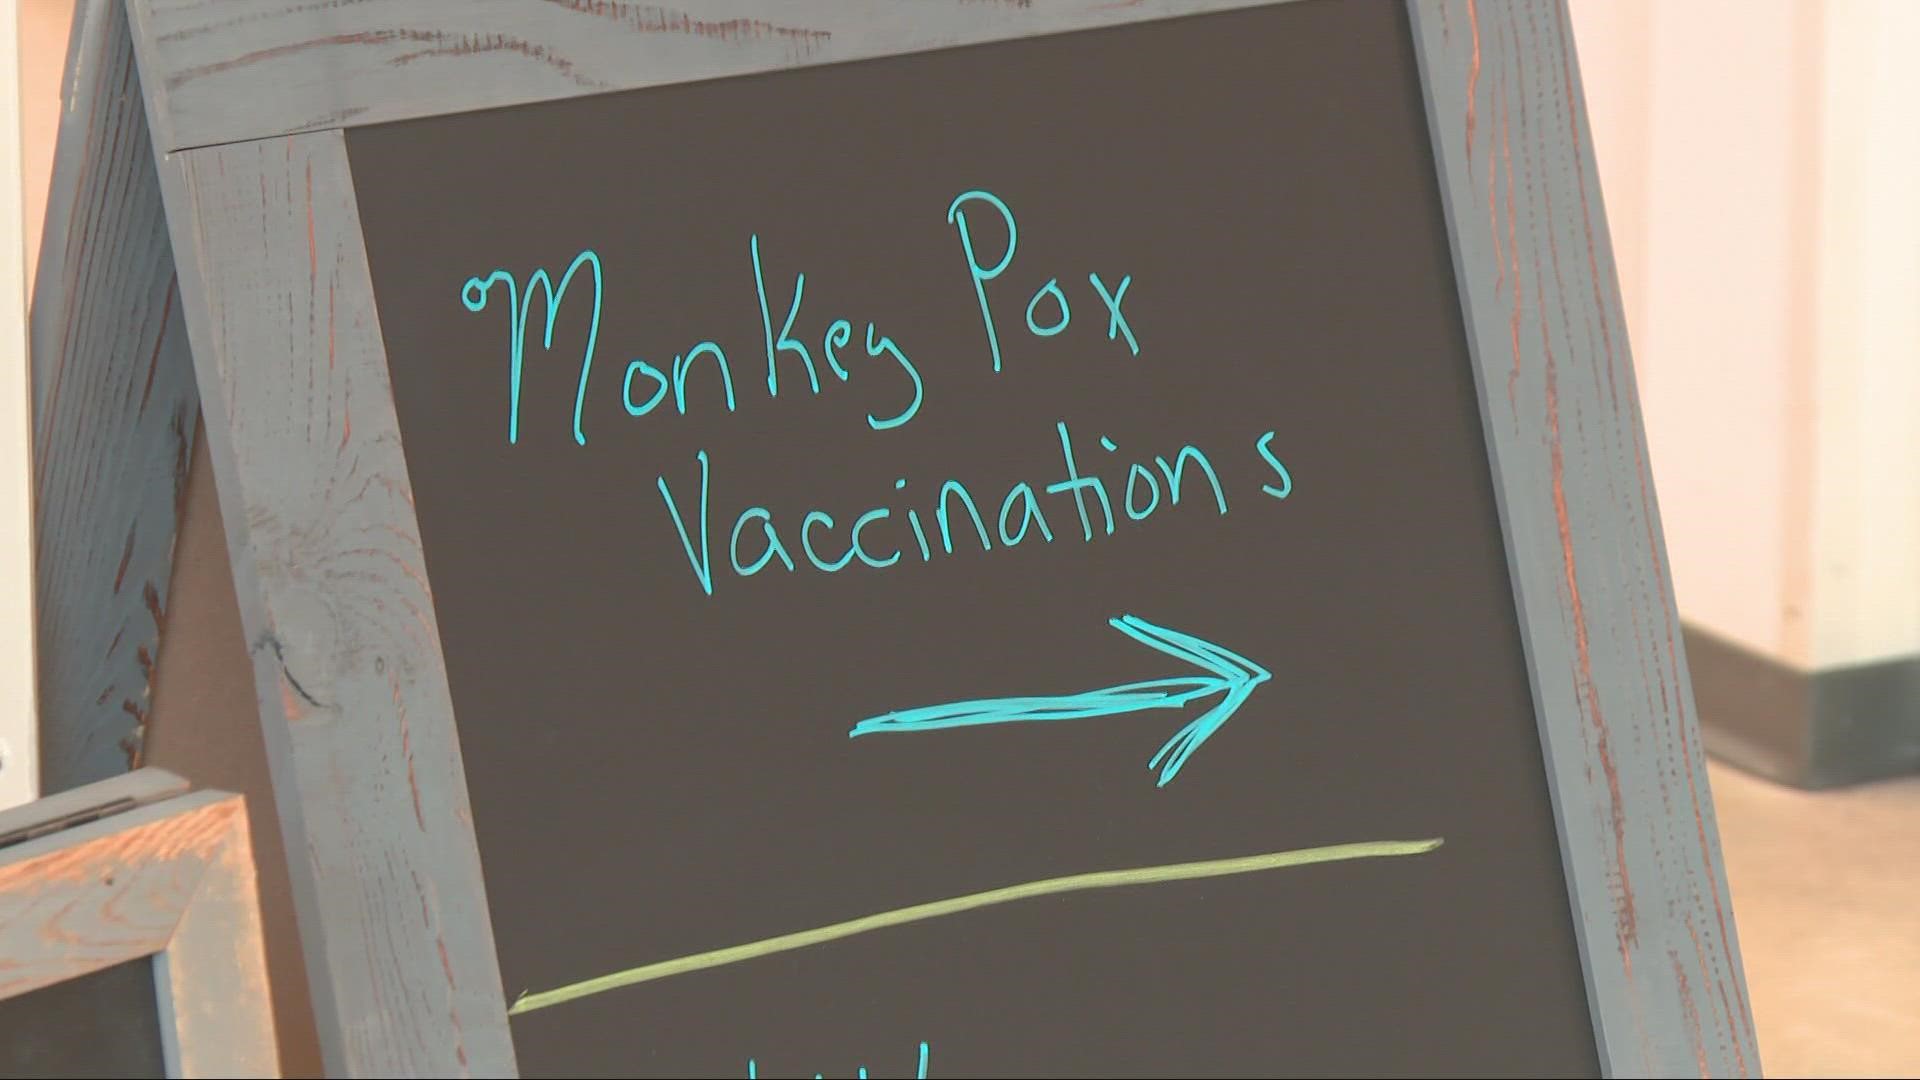 According to the Cuyahoga County Board of Health, there are 133 cases of monkeypox in Ohio. 61 of those are in the county.